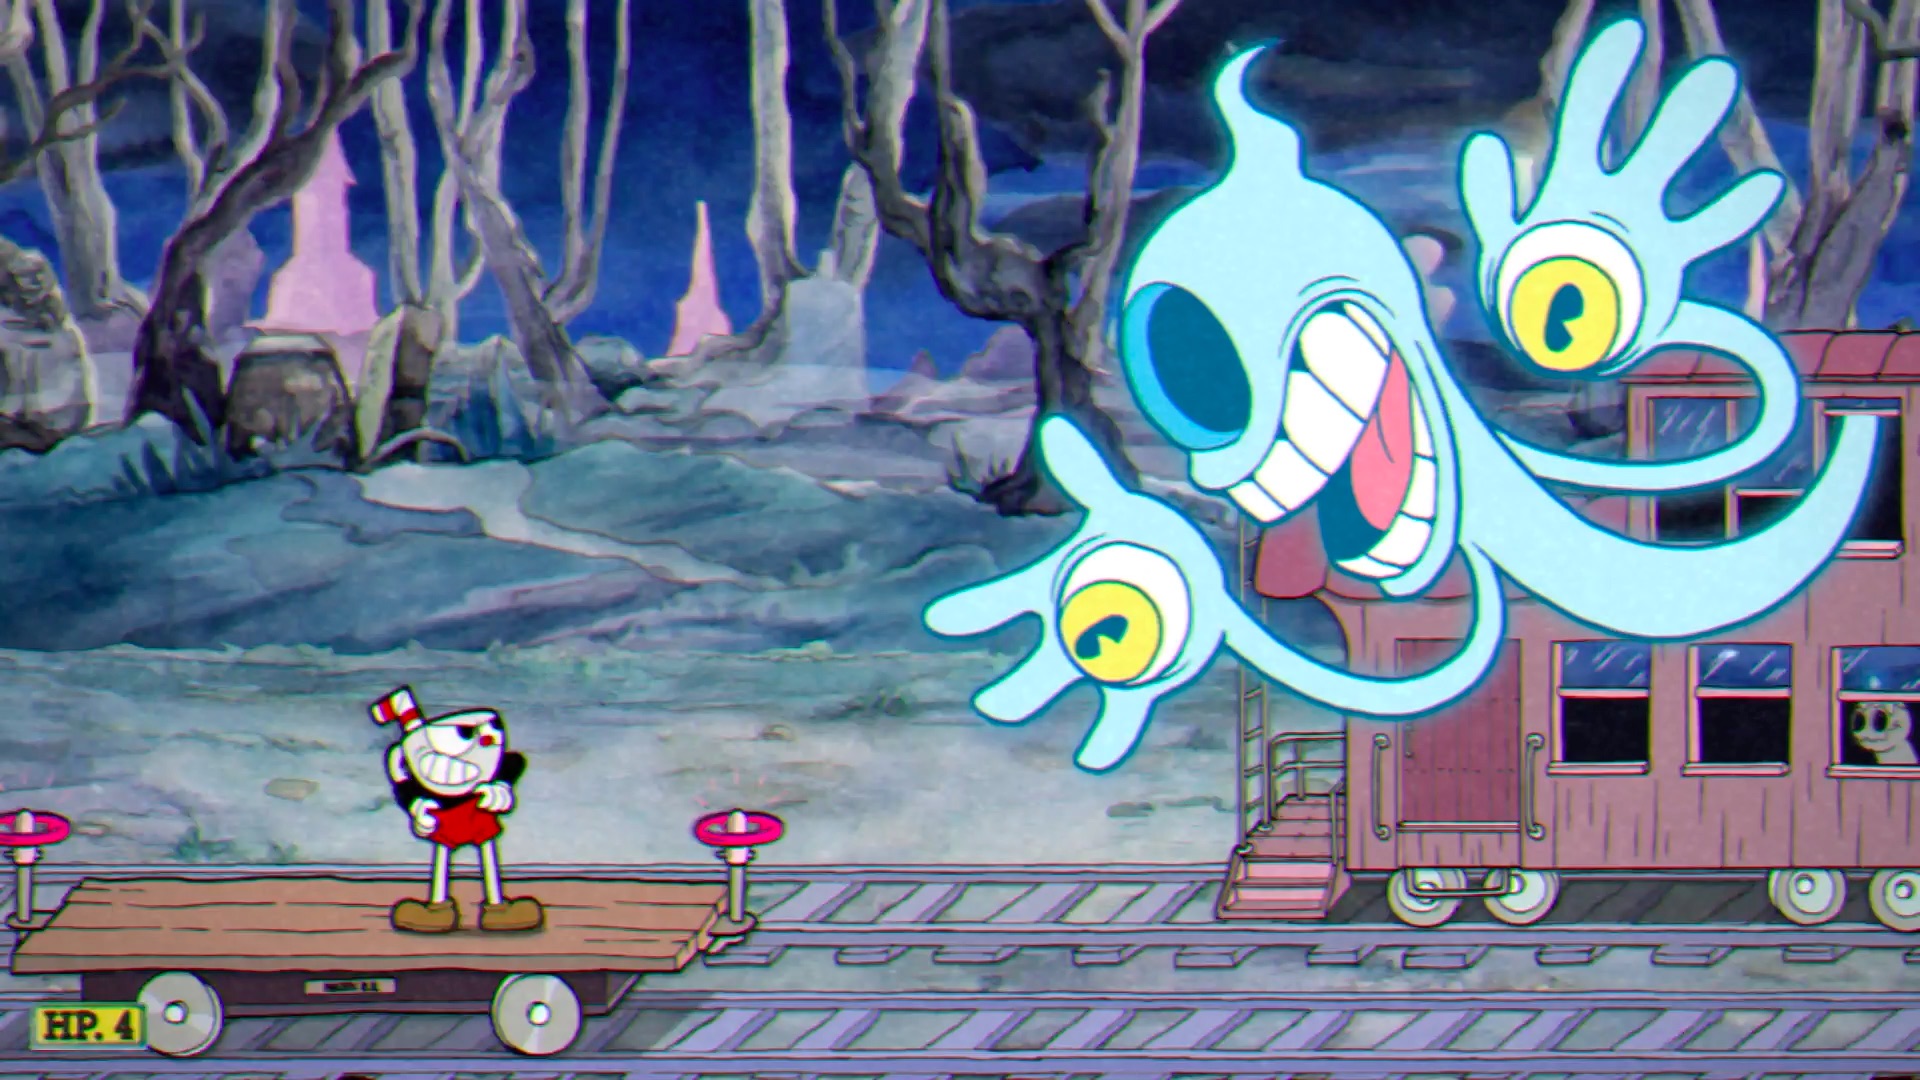 Klassificer Stor Tilgivende Cuphead Bosses Ranked from Easiest to Hardest to Wallop | Digital Trends